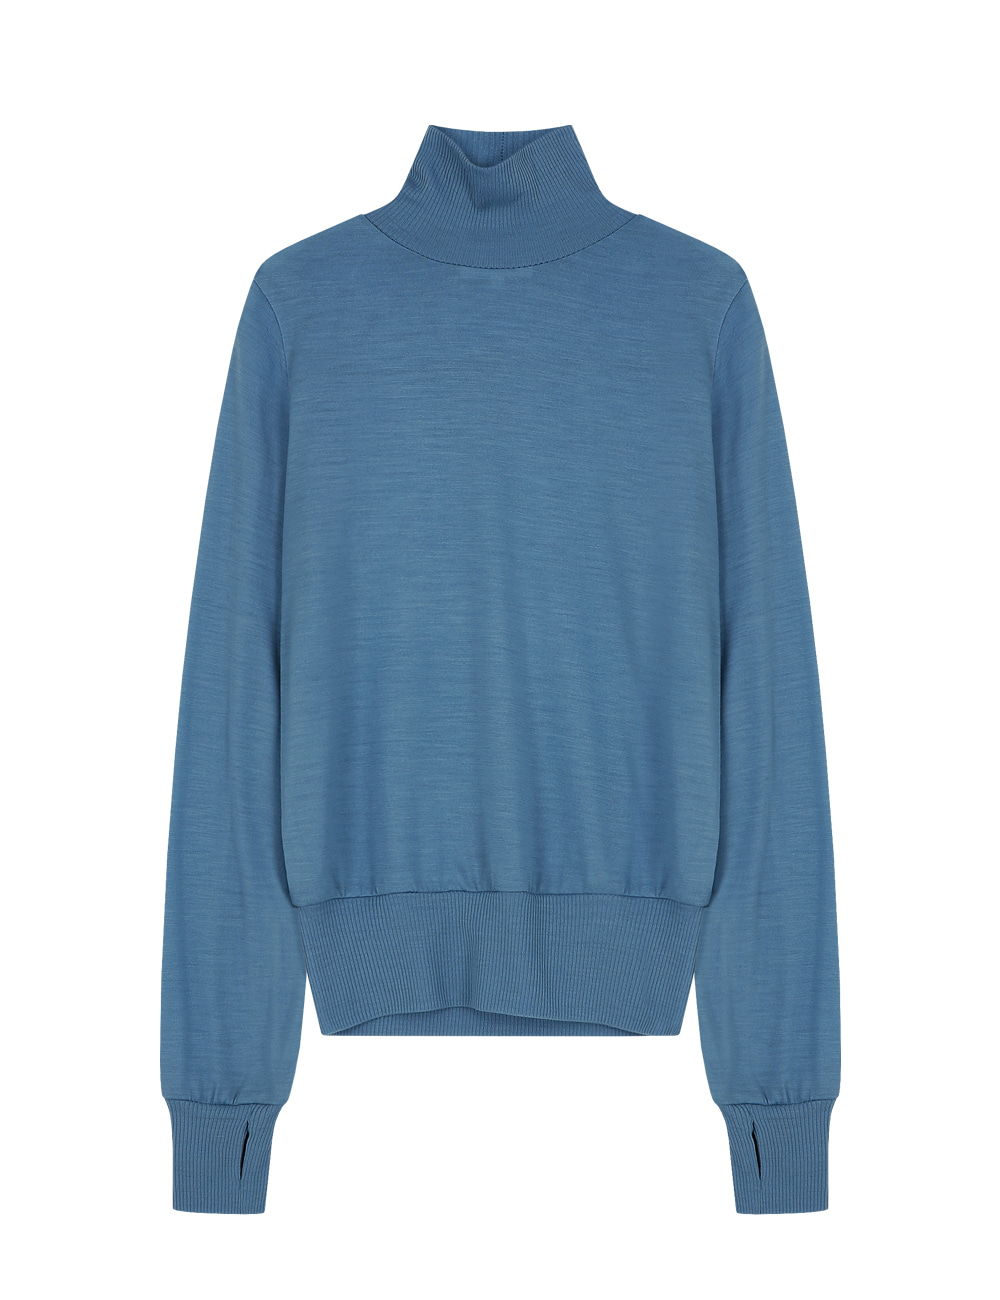 COVER STITCH WOOL JERSEY MOCK NECK TOP (LT BLUE)